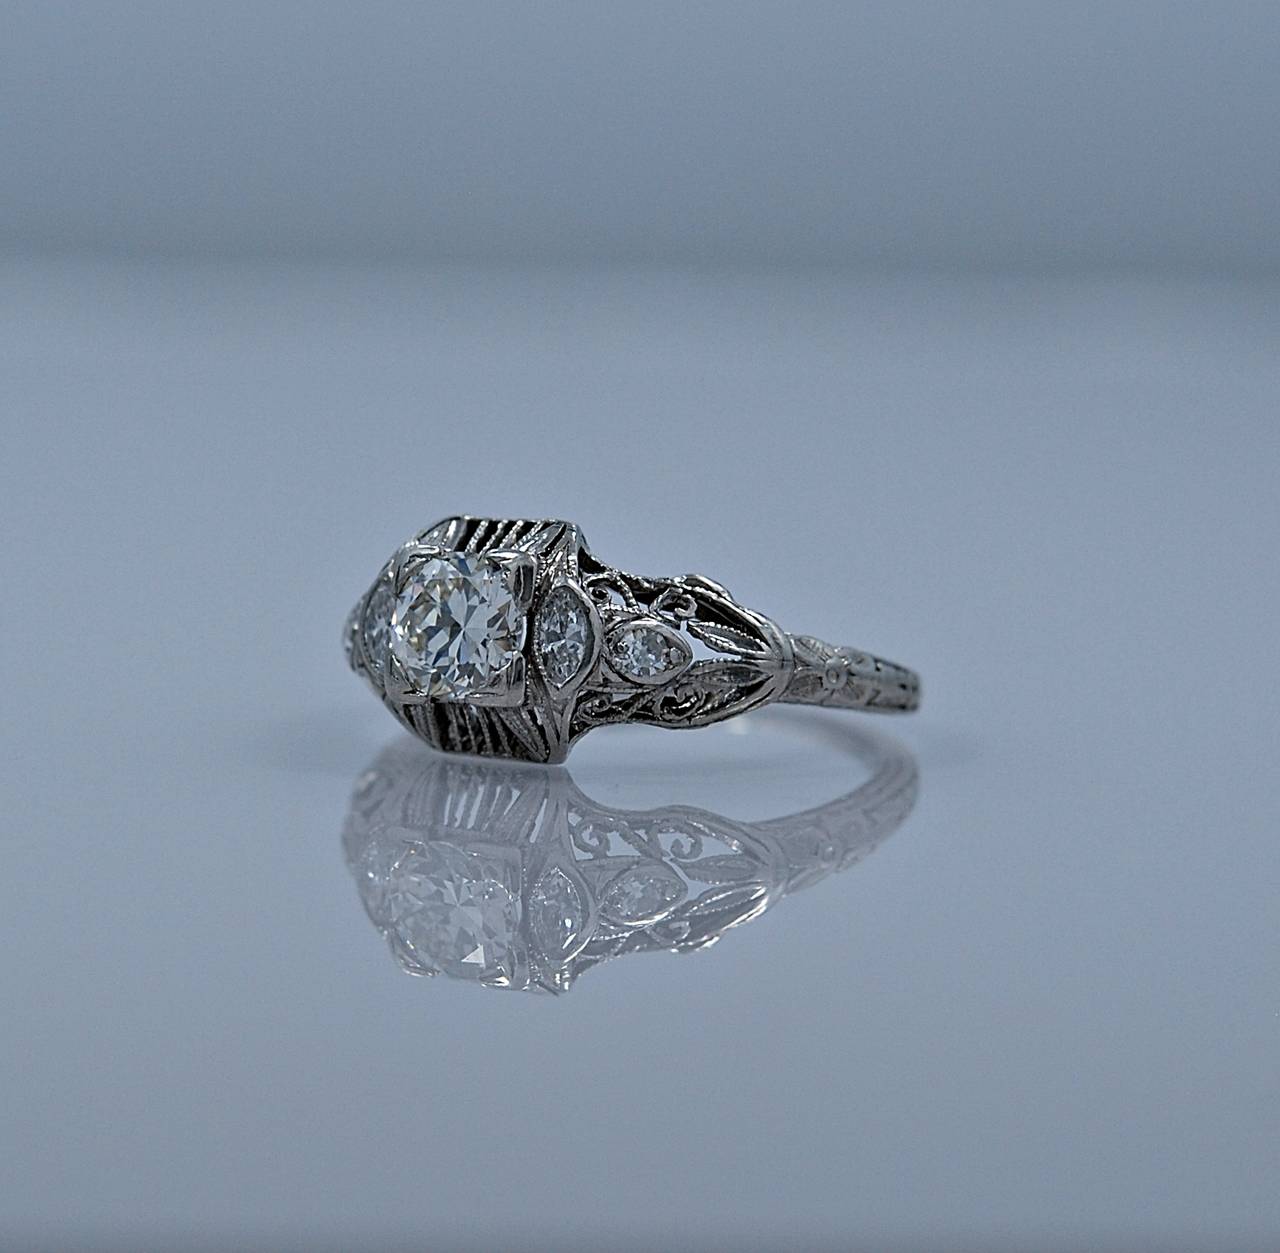 A meticulously filigreed Art Deco/Art Nouveau diamond engagement ring featuring a center diamond weighing .50ct. apx. with VS1 clarity and H color. The center diamond is accompanied with .25ct. apx. T.W. of diamond melee, specifically antique